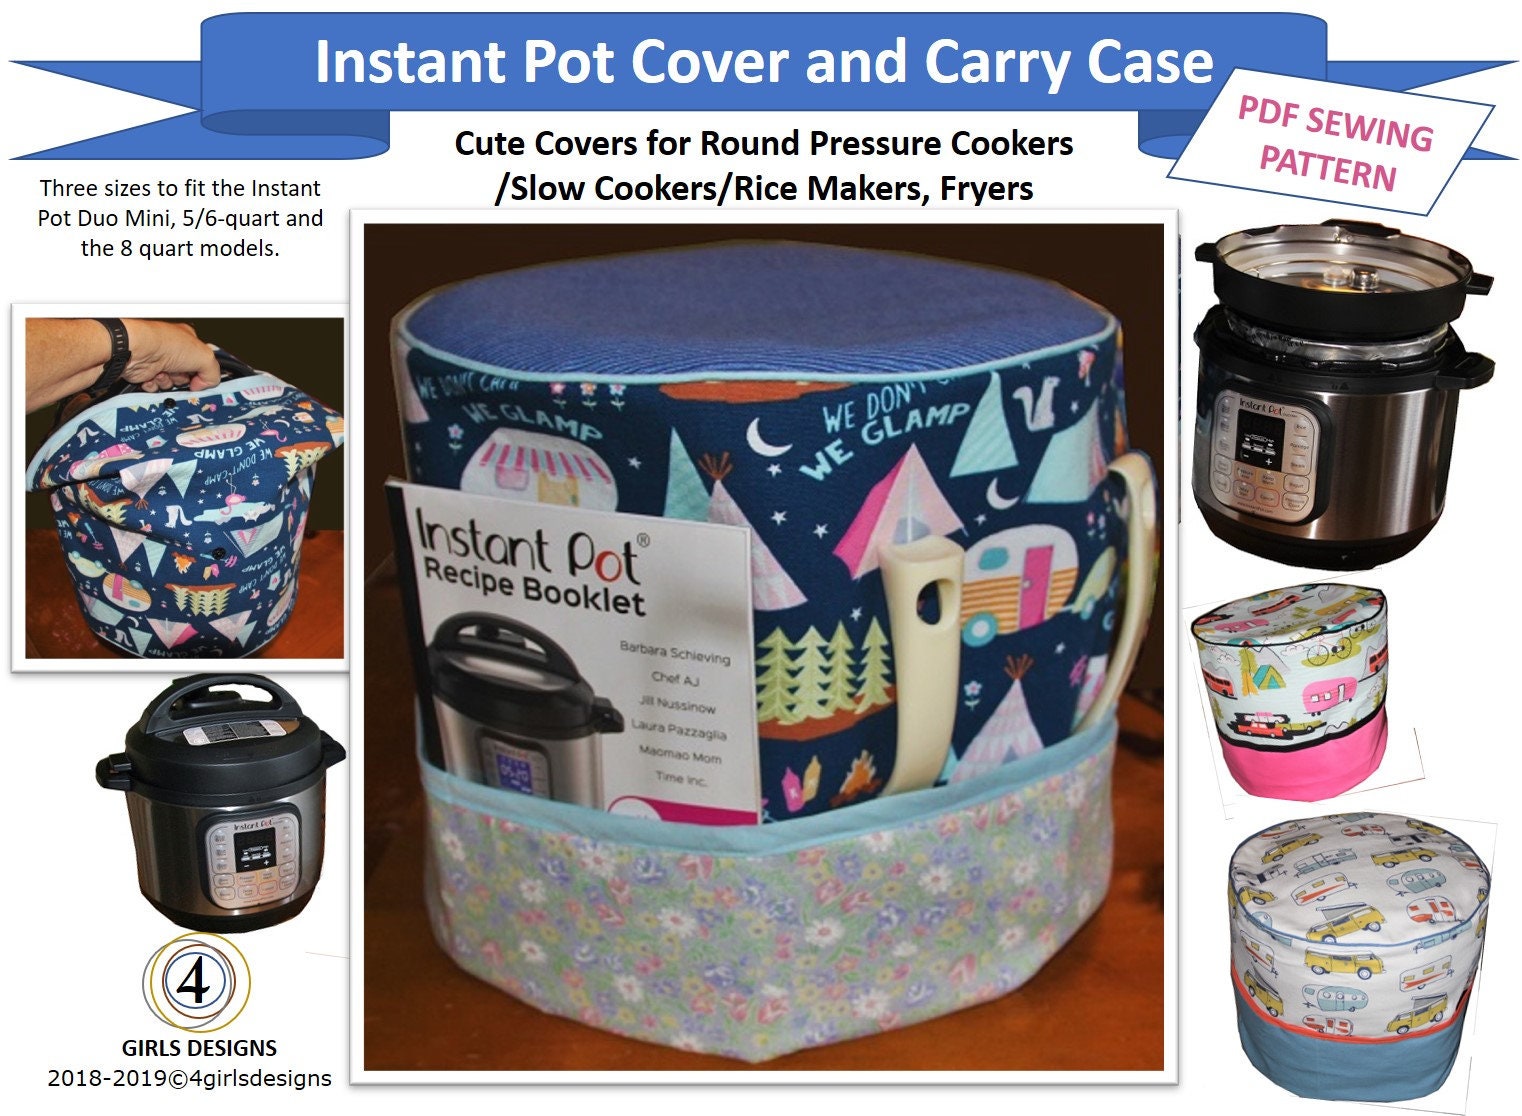 HOMEST iSH09-M607974mn Dust Cover with Pockets for Instant Pot 6